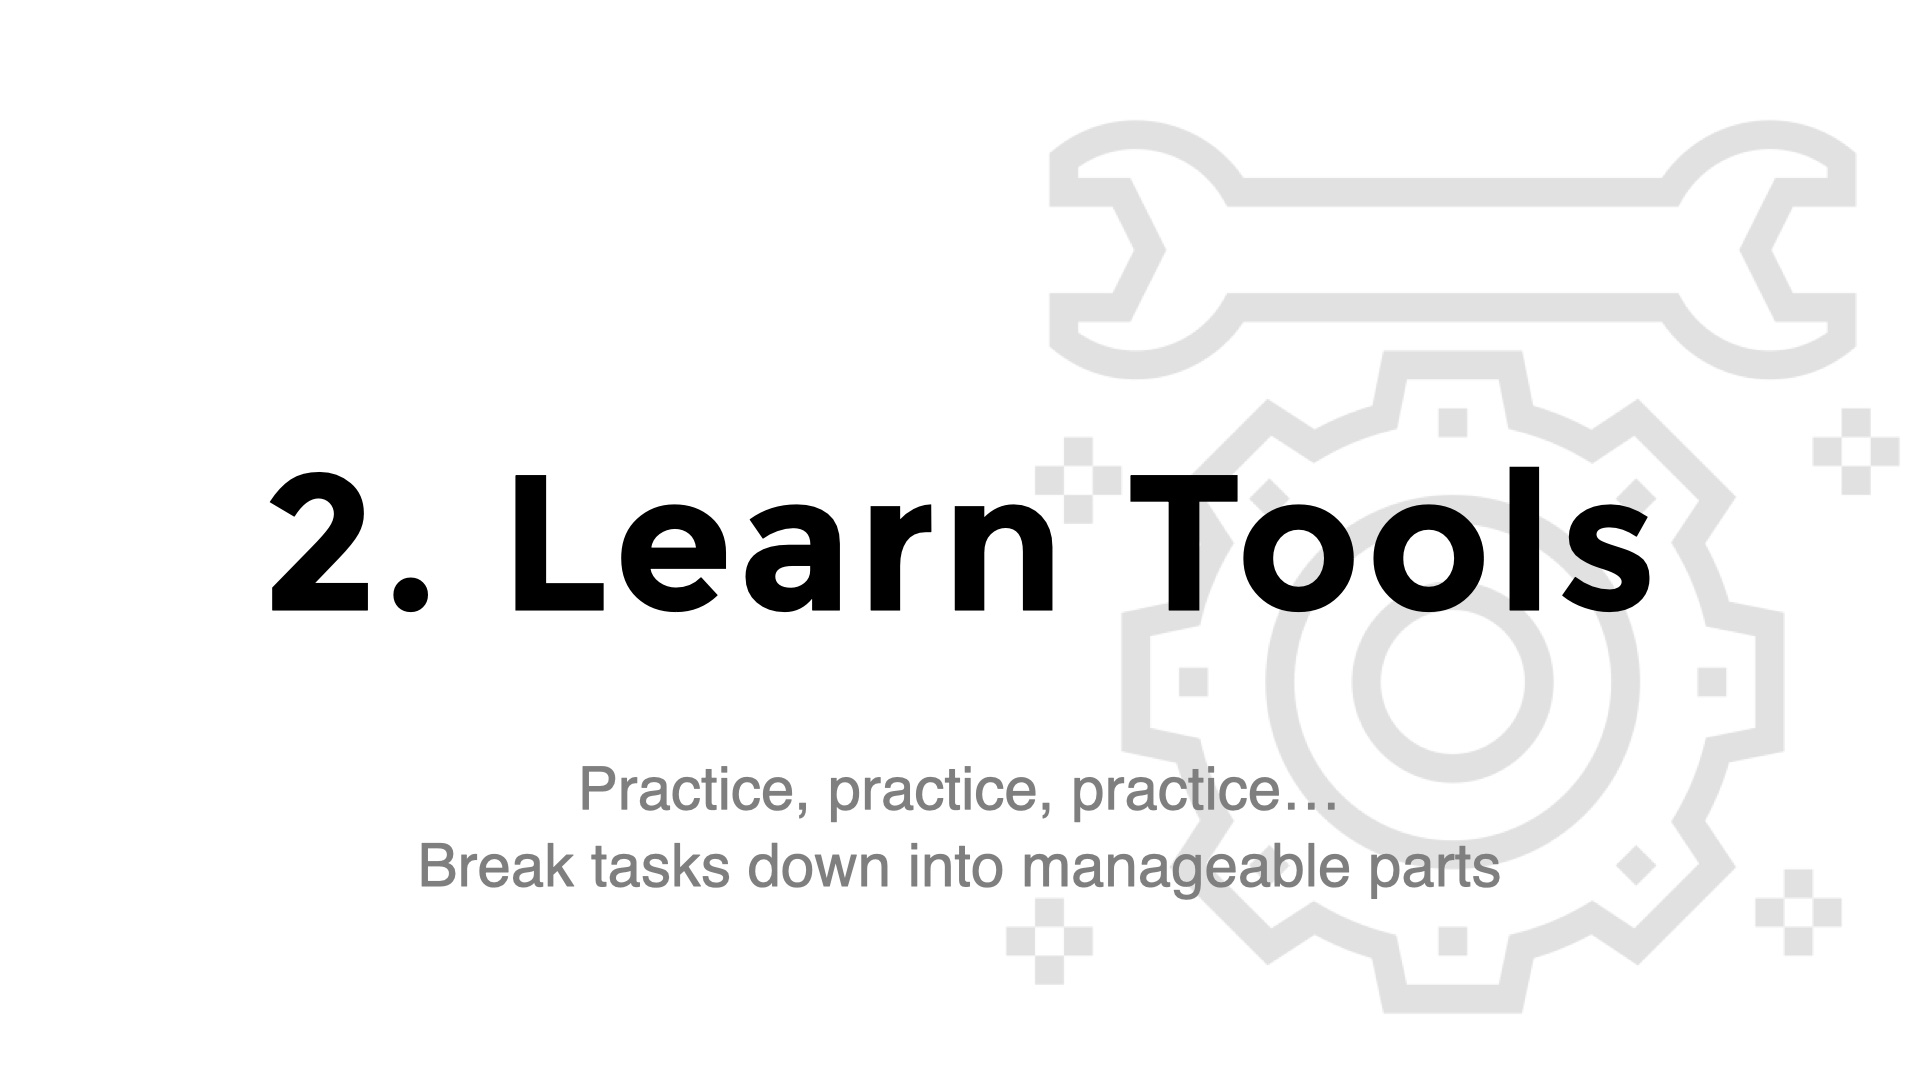 Title Slide: 2. Learn Tools. Subtitle: Practice, practice, practice…
Break tasks down into manageable parts